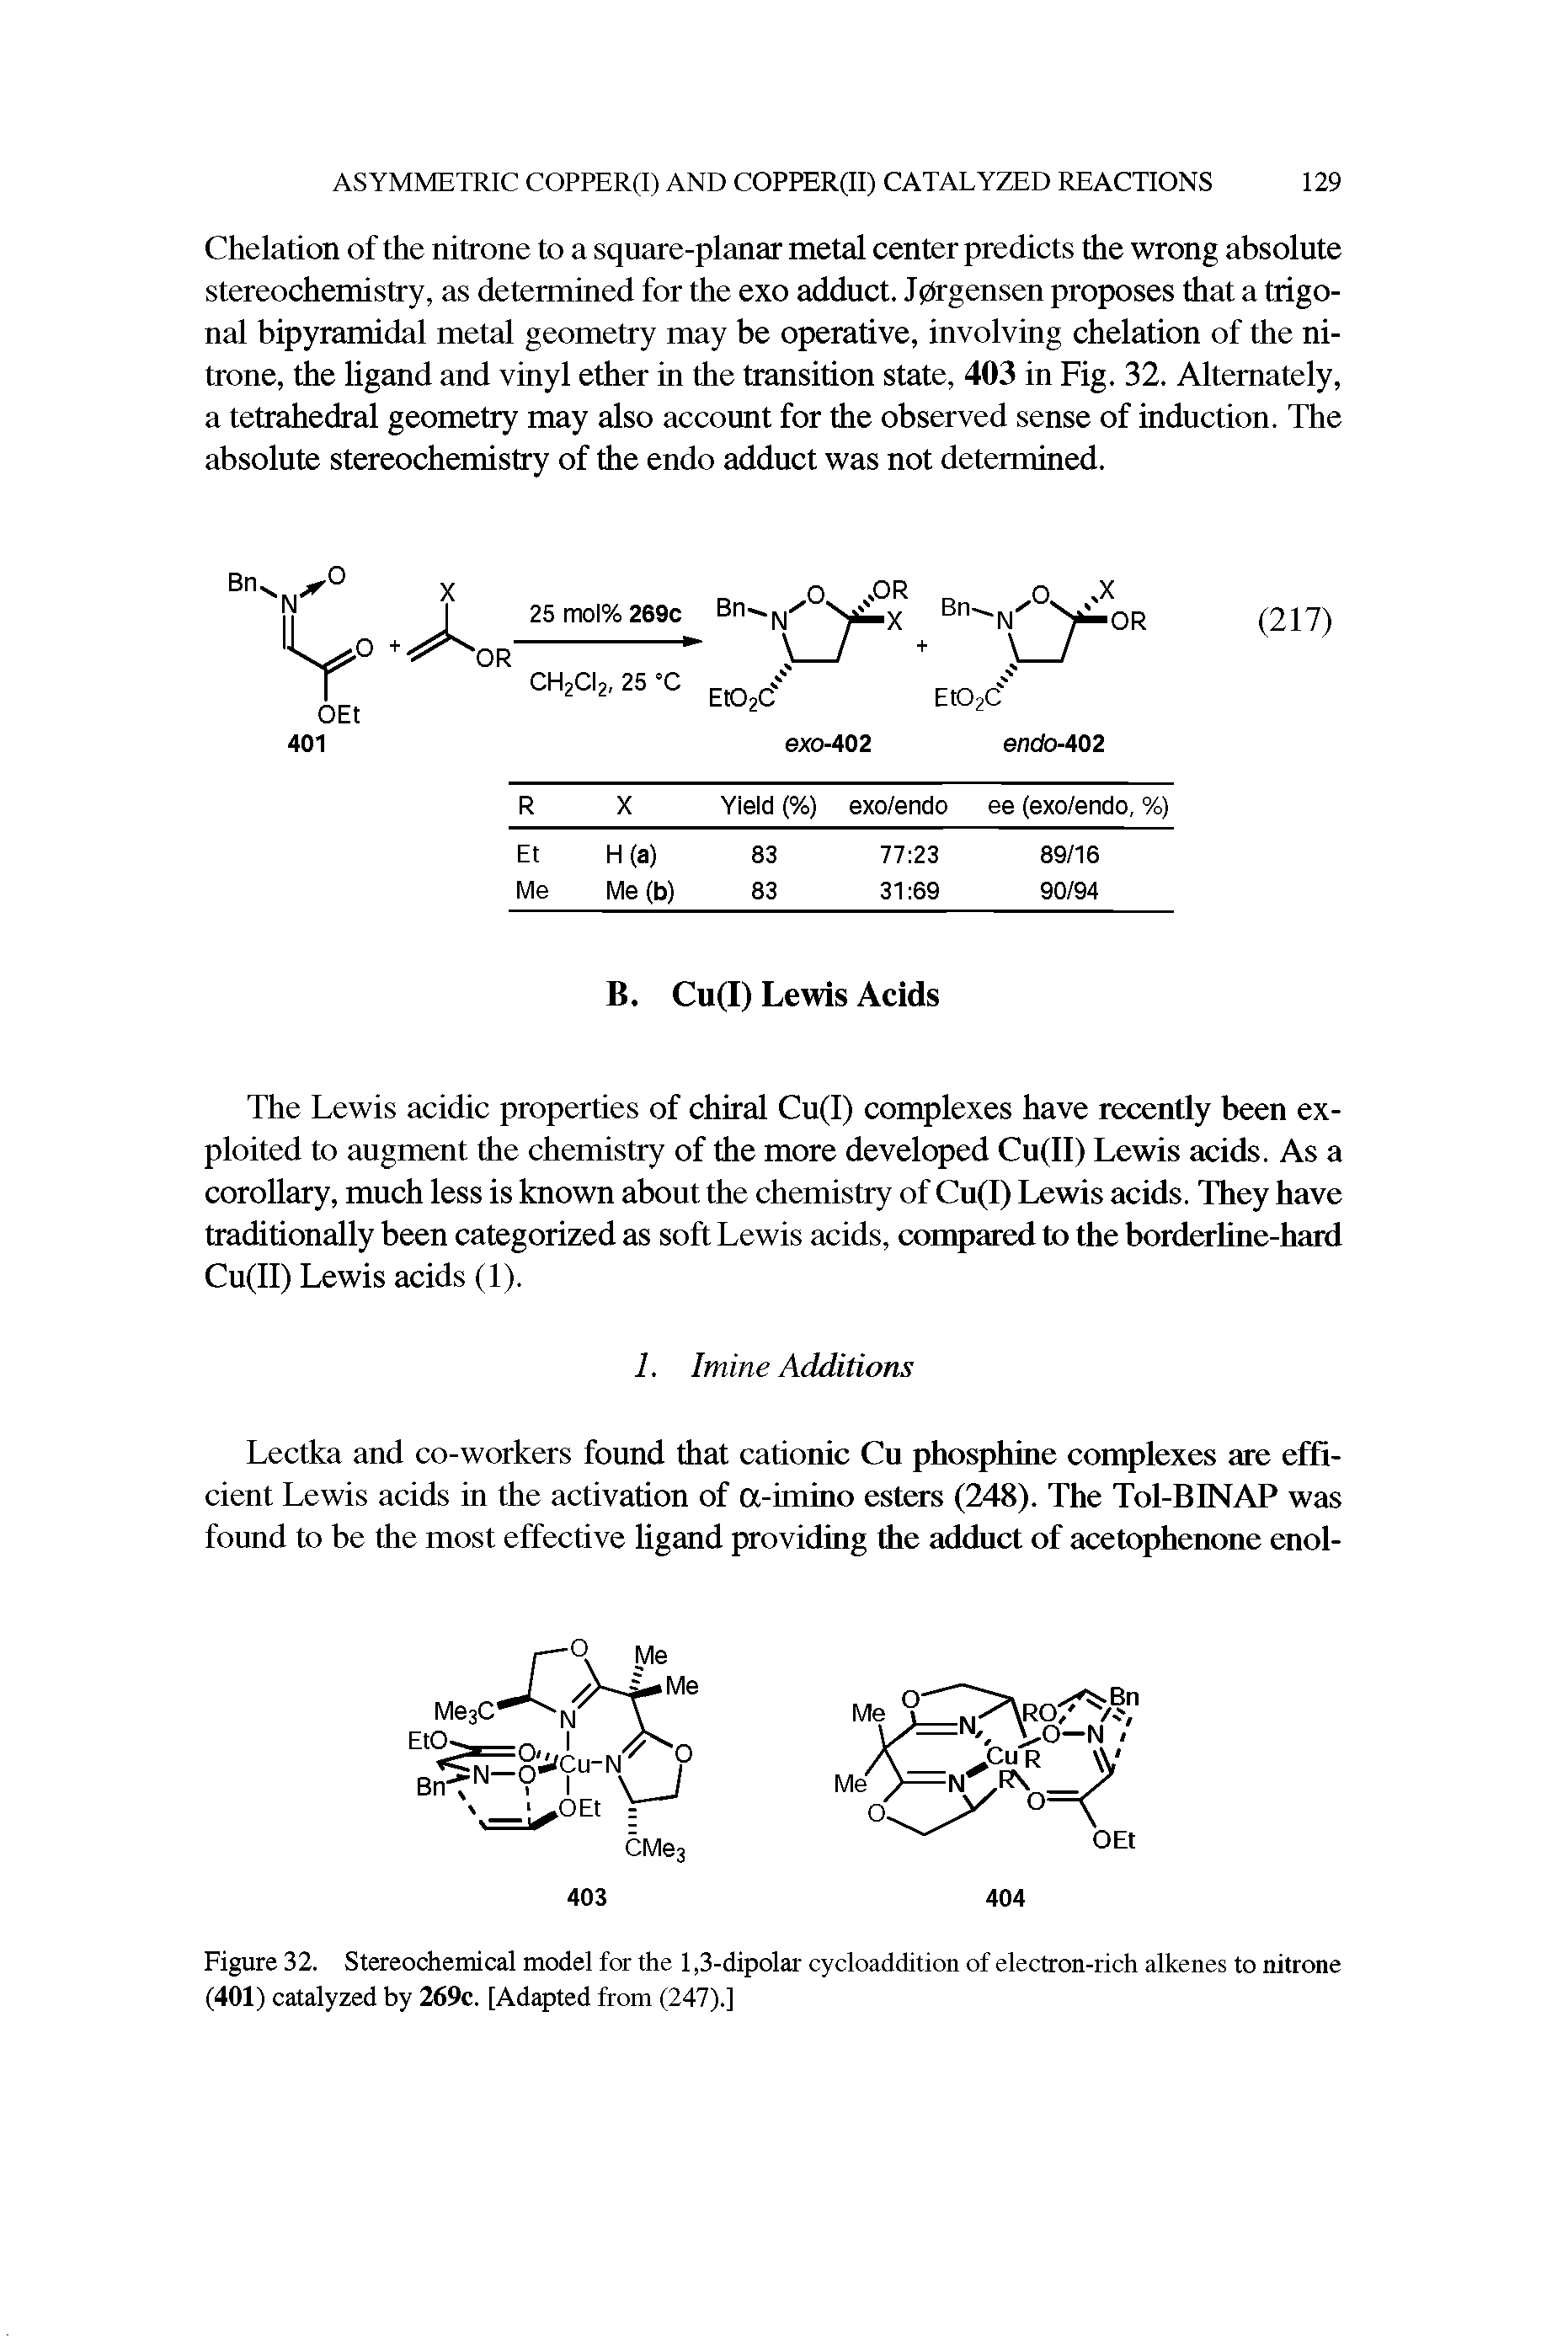 Figure 32. Stereochemical model for the 1,3-dipolar cycloaddition of electron-rich alkenes to nitrone (401) catalyzed by 269c. [Adapted from (247).]...